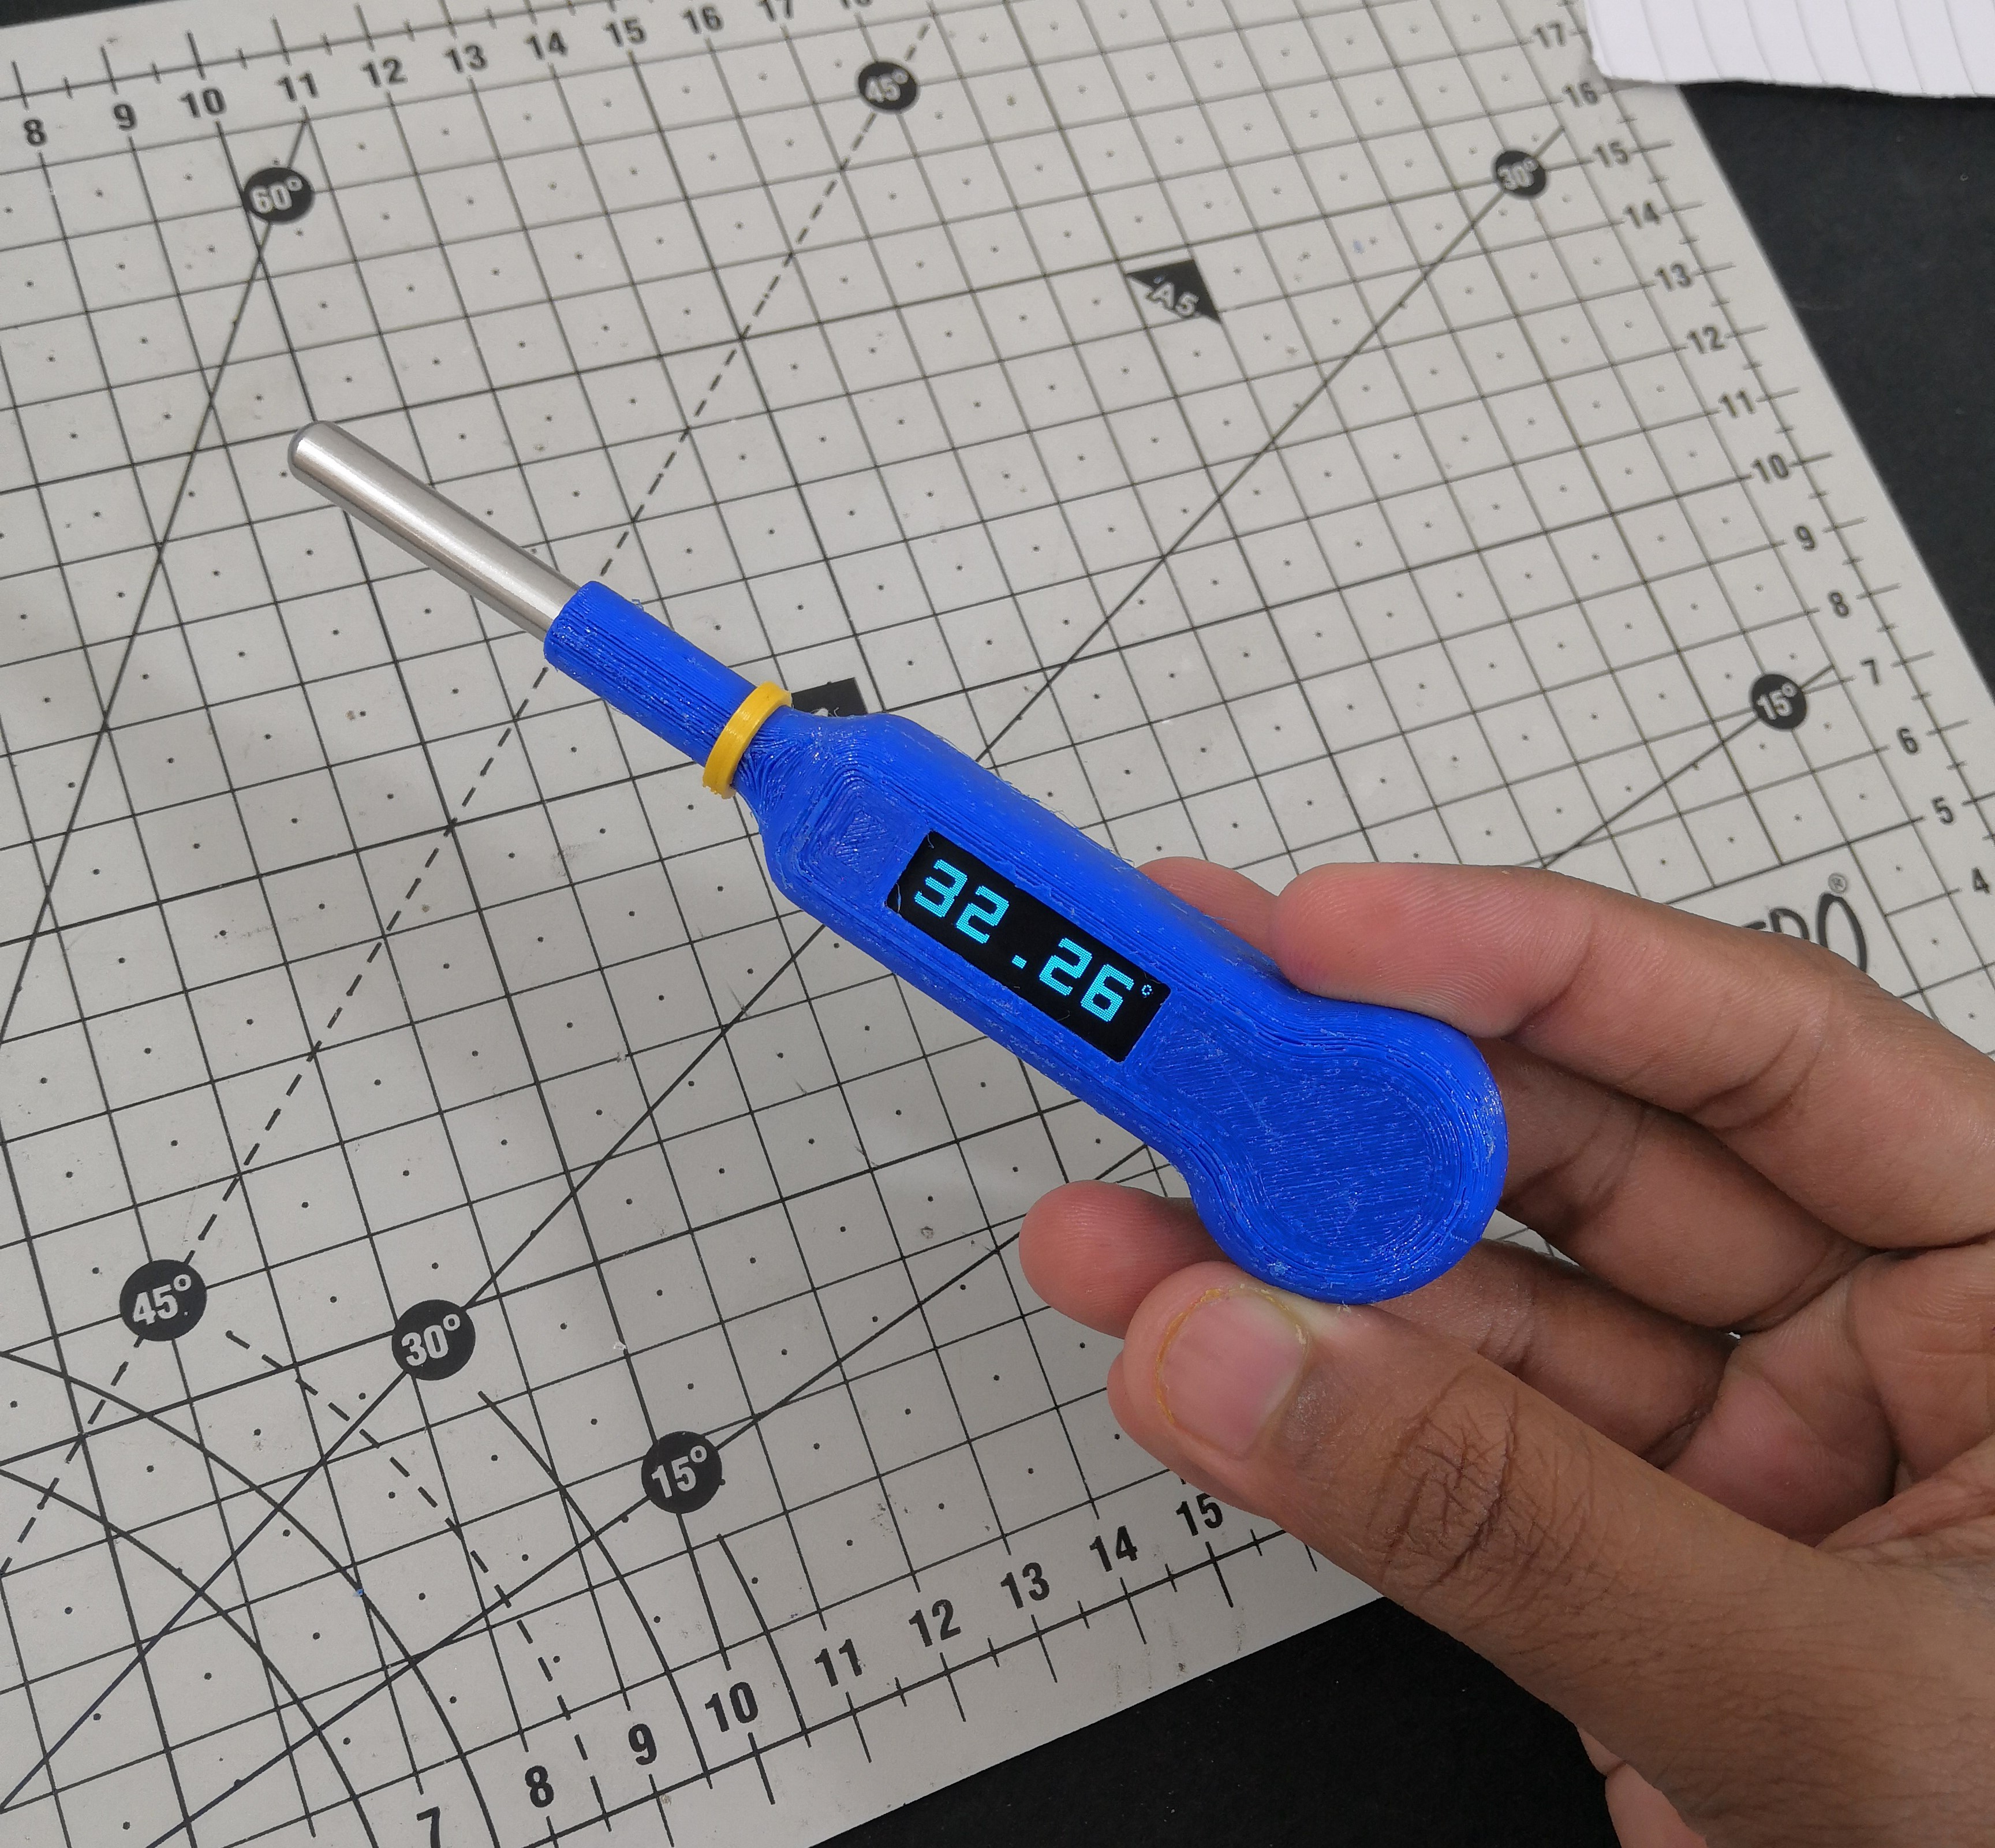 digital thermometer final build